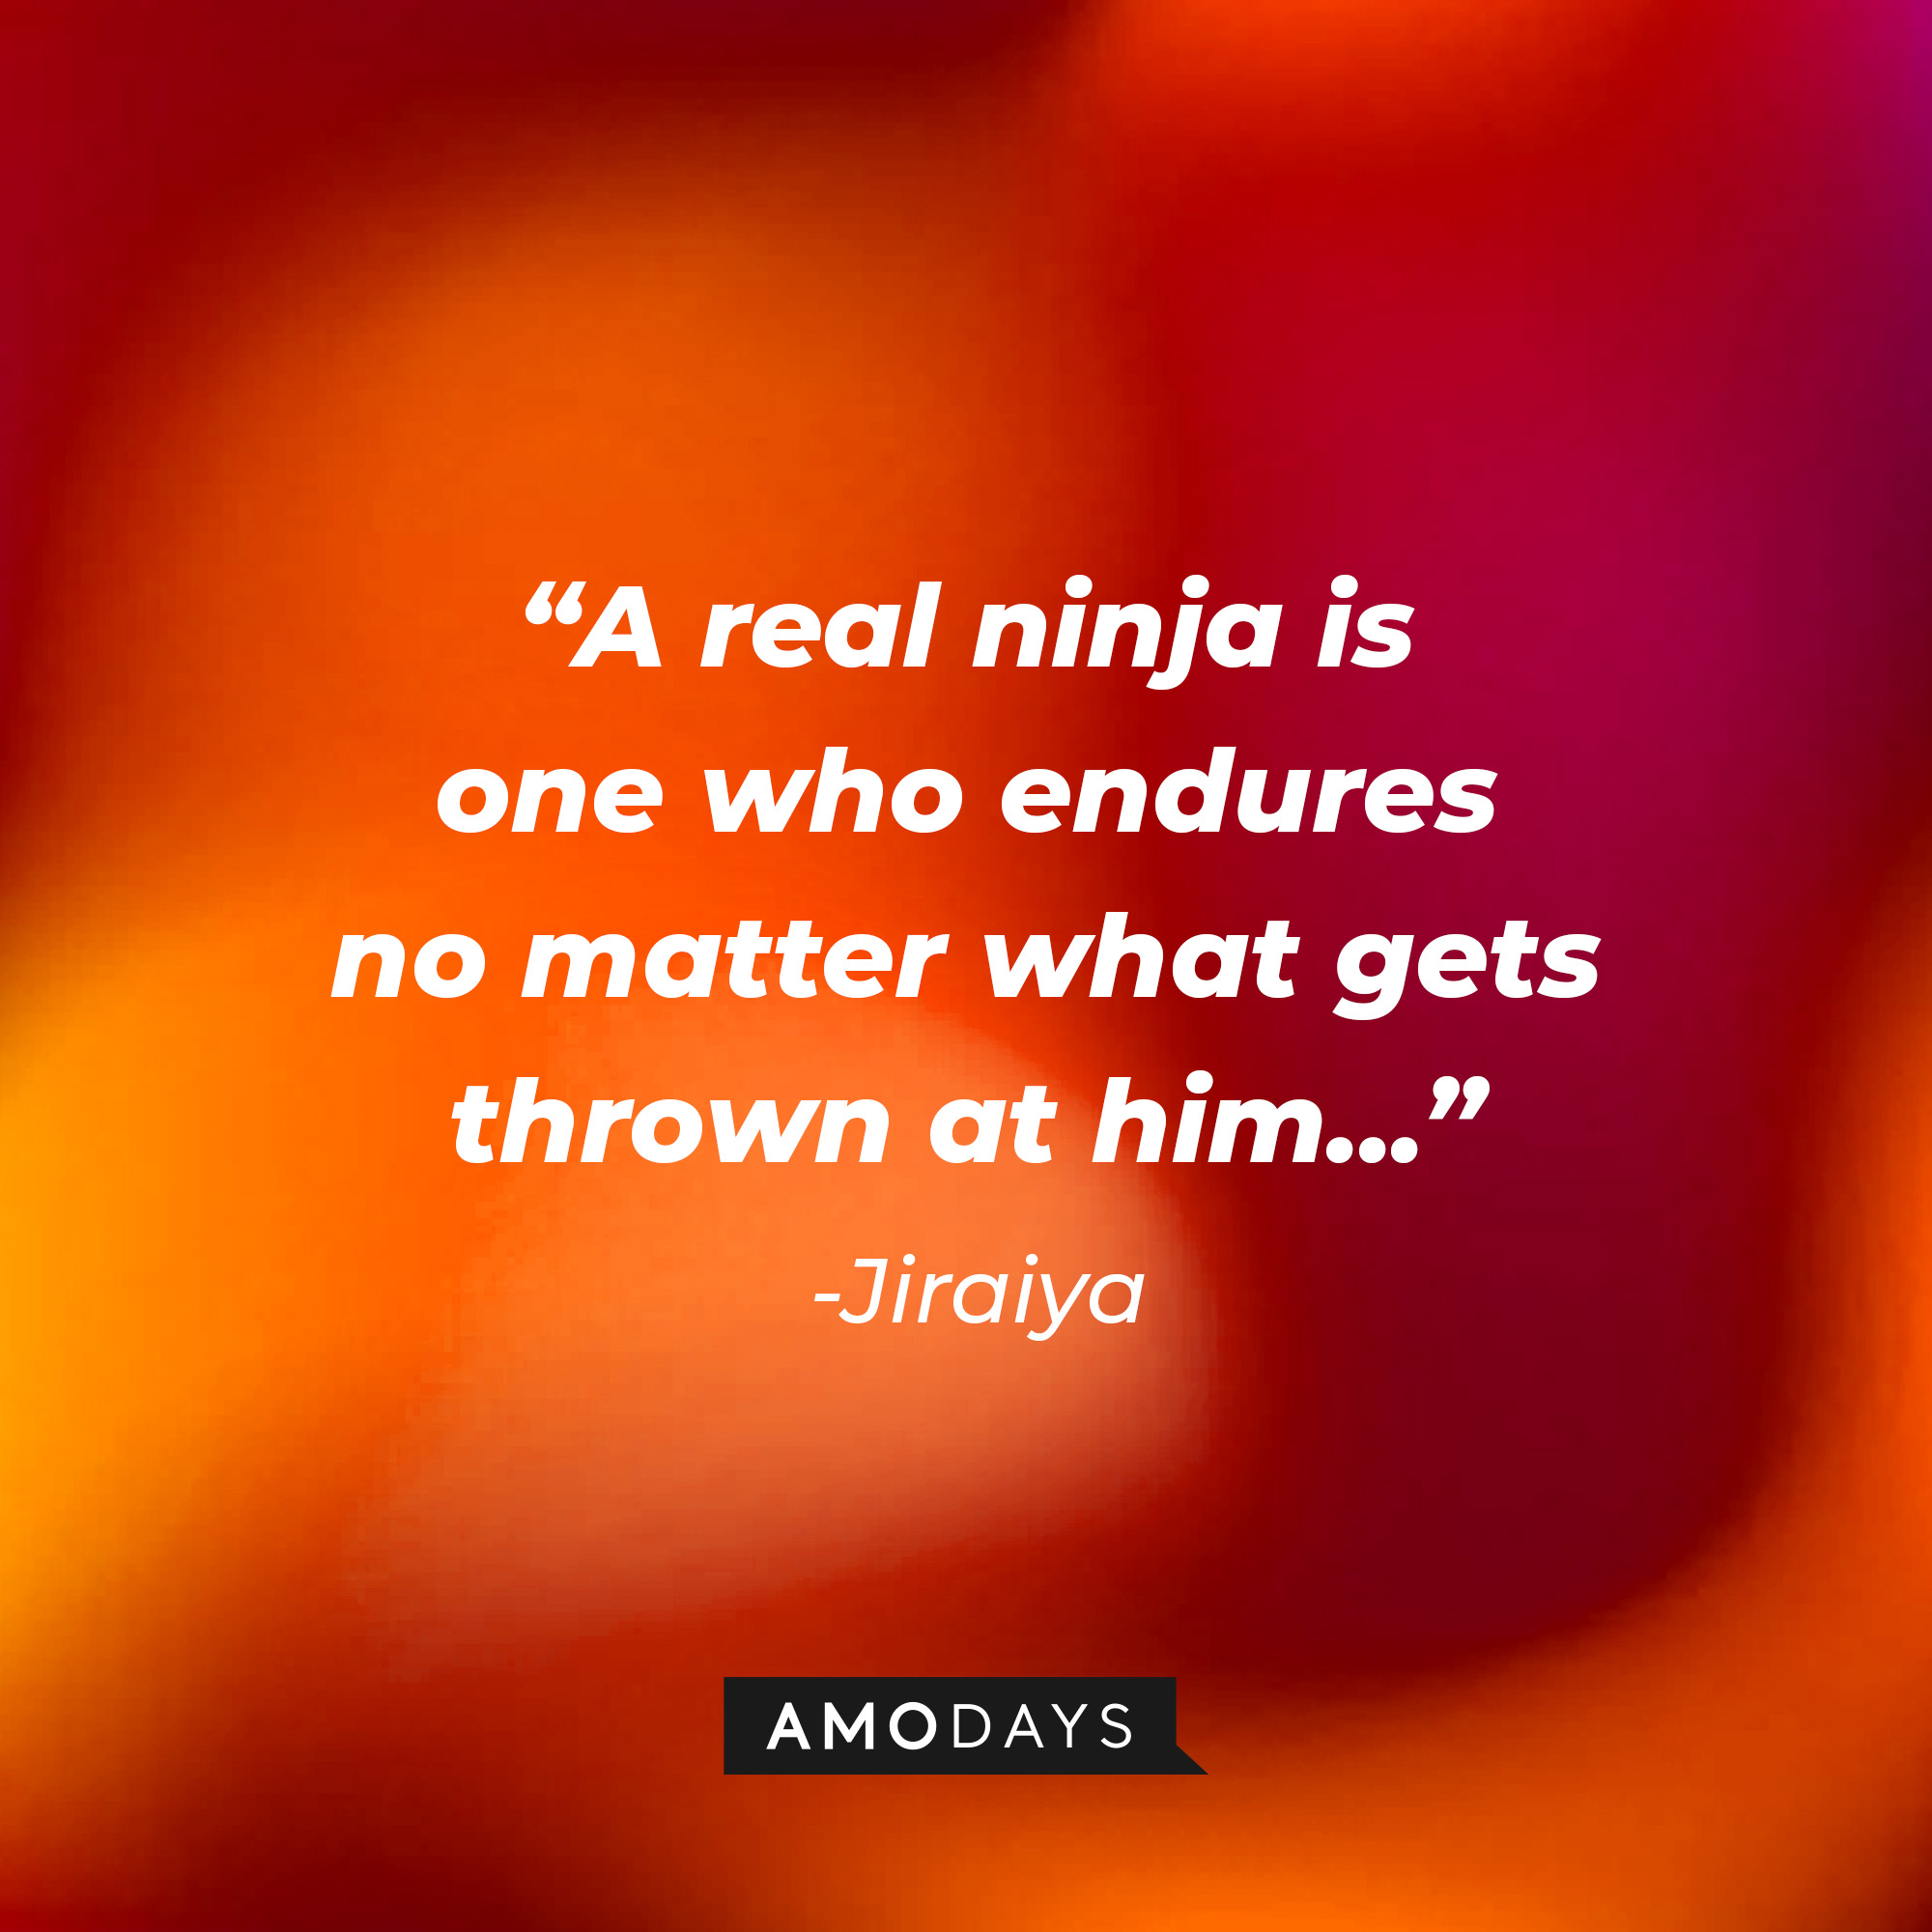 Jiraiya’s quote: “A real ninja is one who endures no matter what gets thrown at him..." │ Source: AmoDays